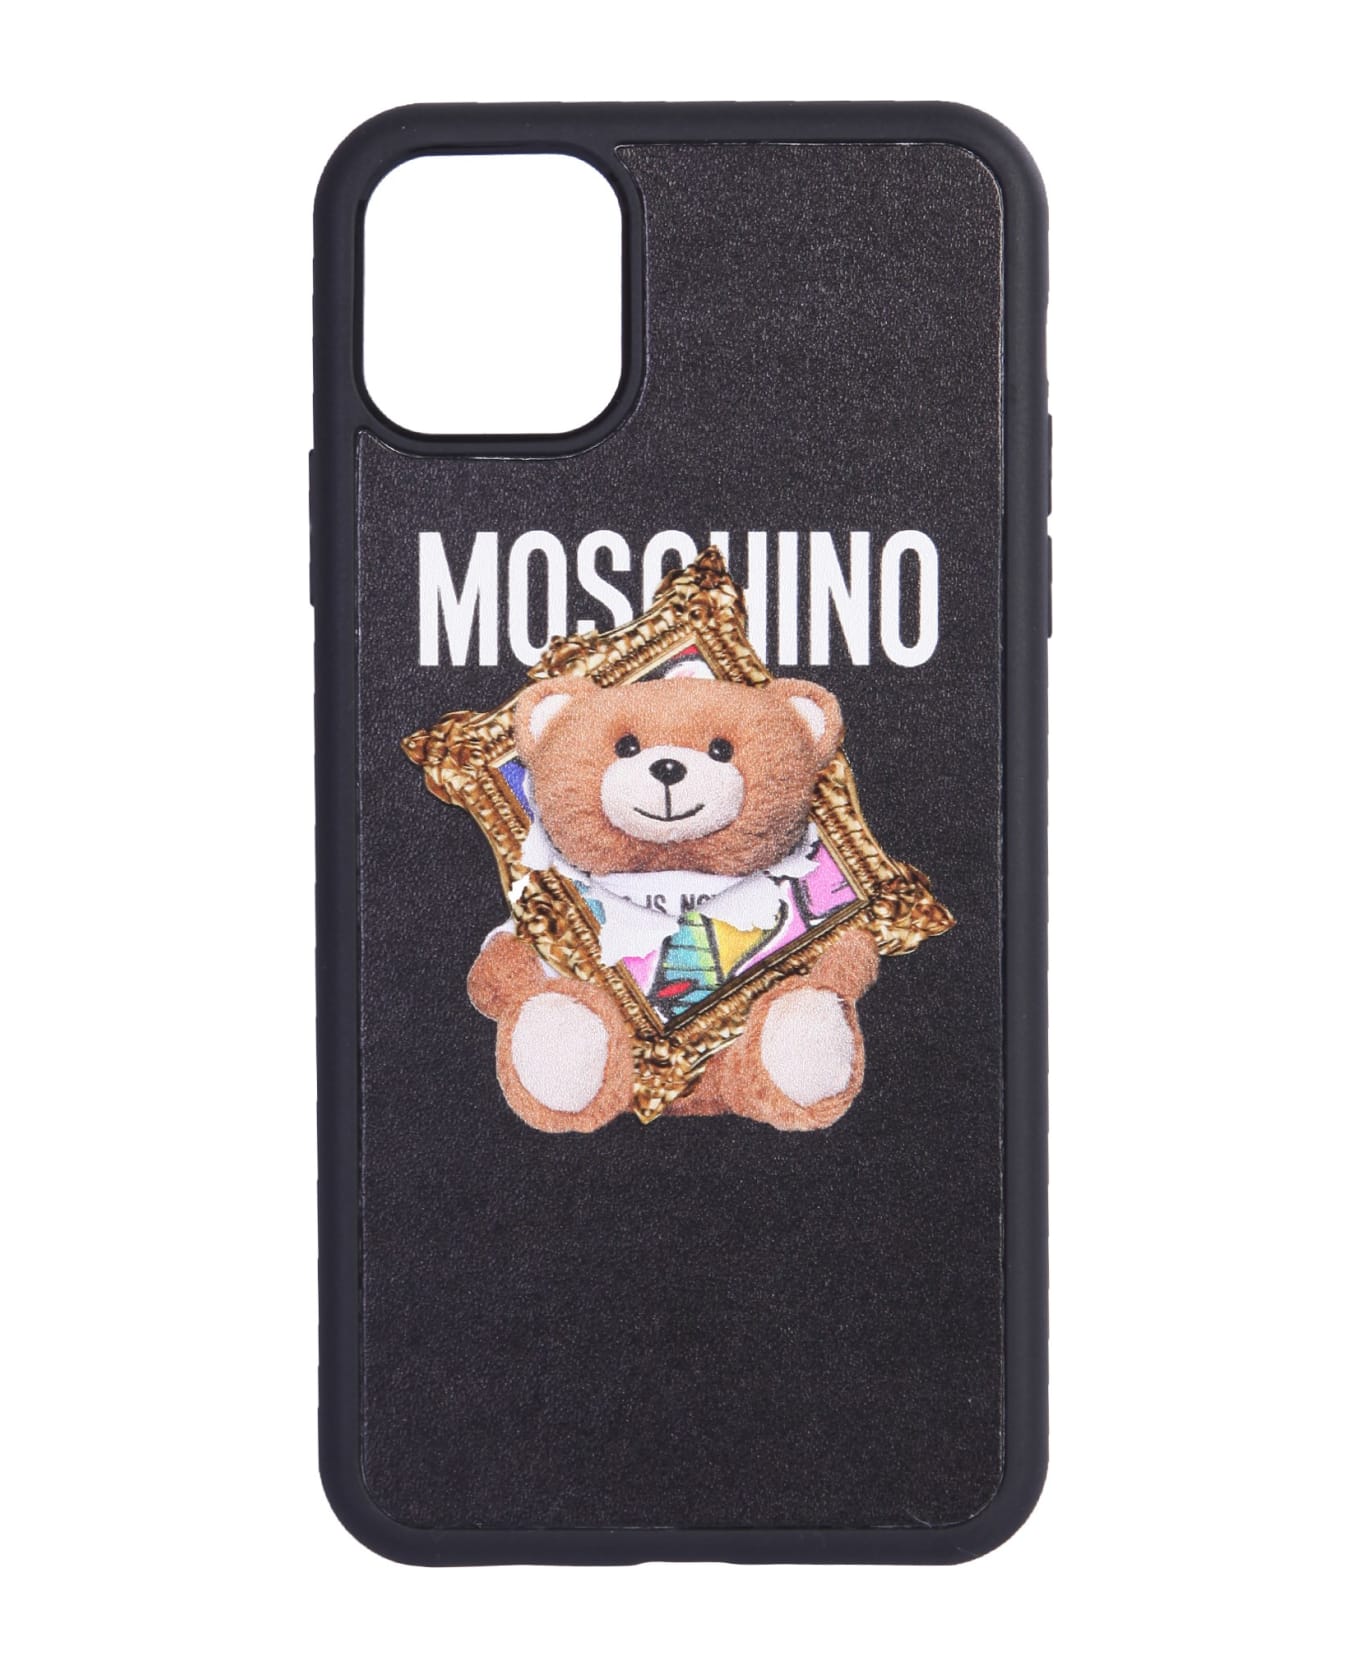 Moschino Cover For Iphone 11 Max | italist